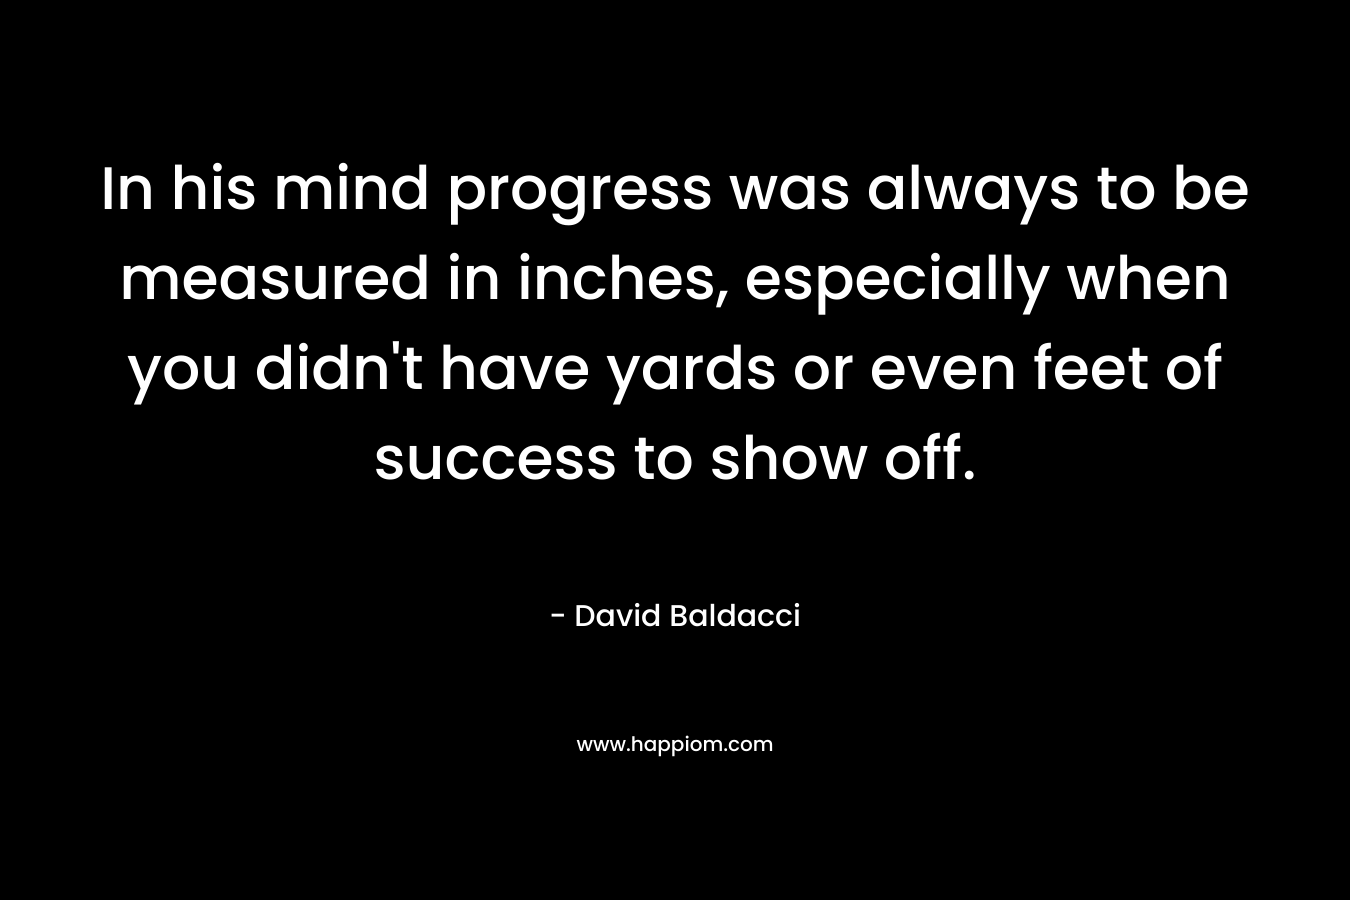 In his mind progress was always to be measured in inches, especially when you didn’t have yards or even feet of success to show off. – David Baldacci